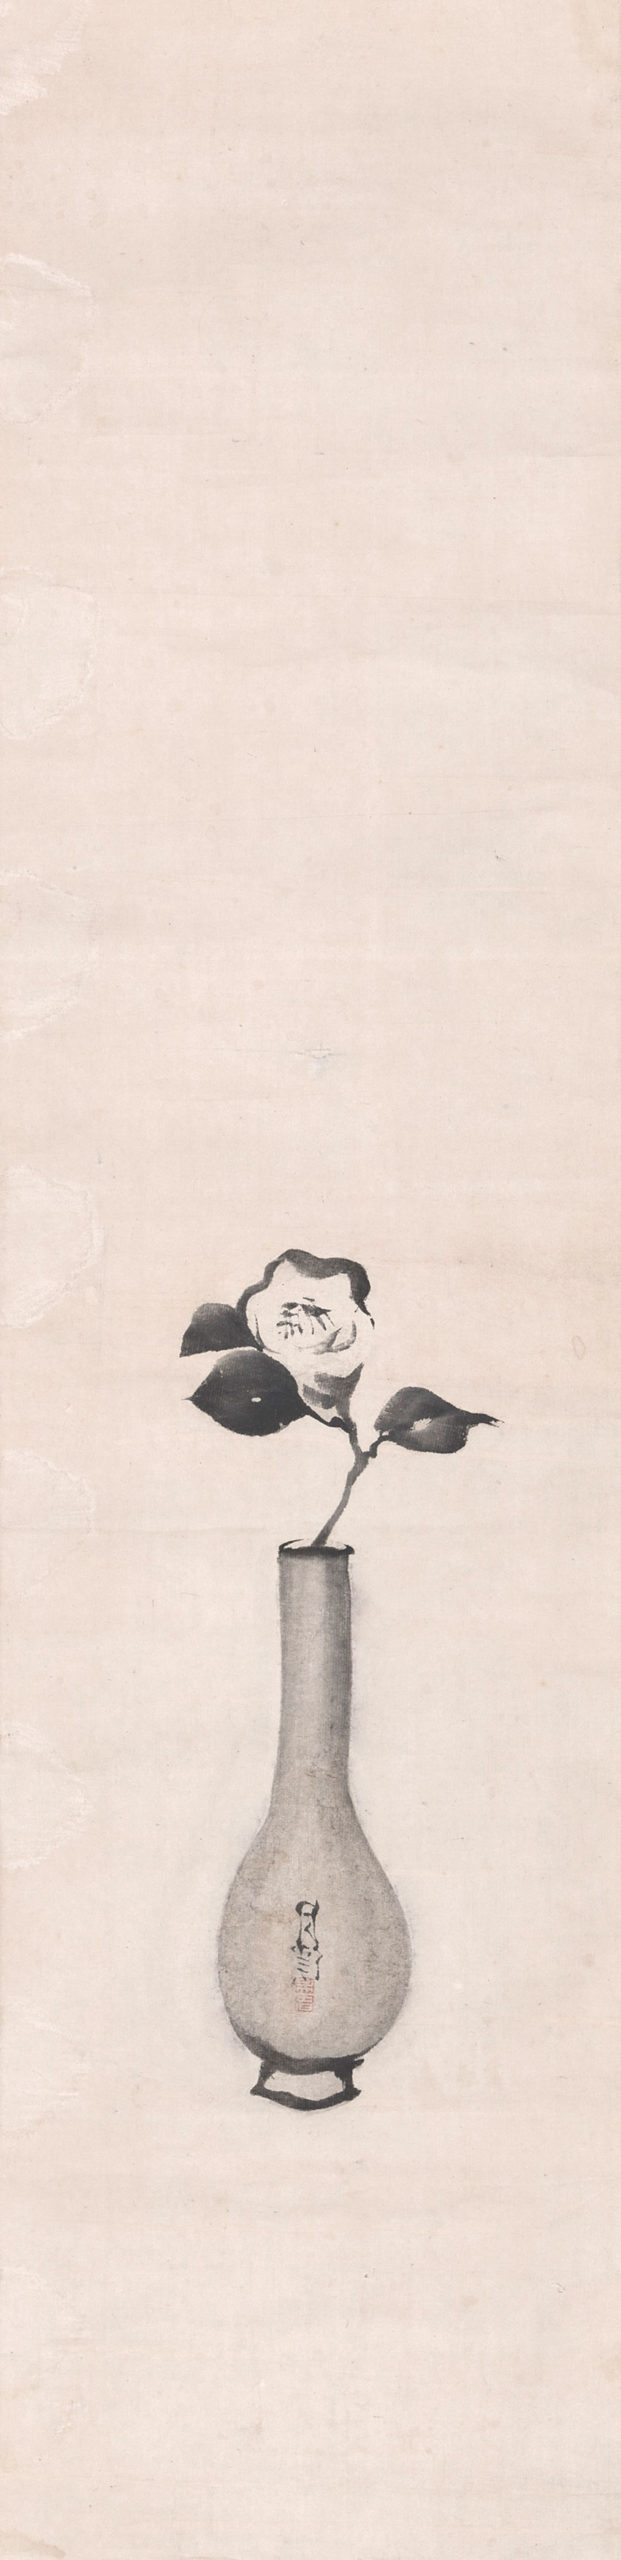 Matsumura Gekkei, better known as Goshun. Settsu, Kyoto, 1752-1811. A branch of white camellia in a vase. Painting in ink and colours on silk, 99,3 x 24,2 cm_RET